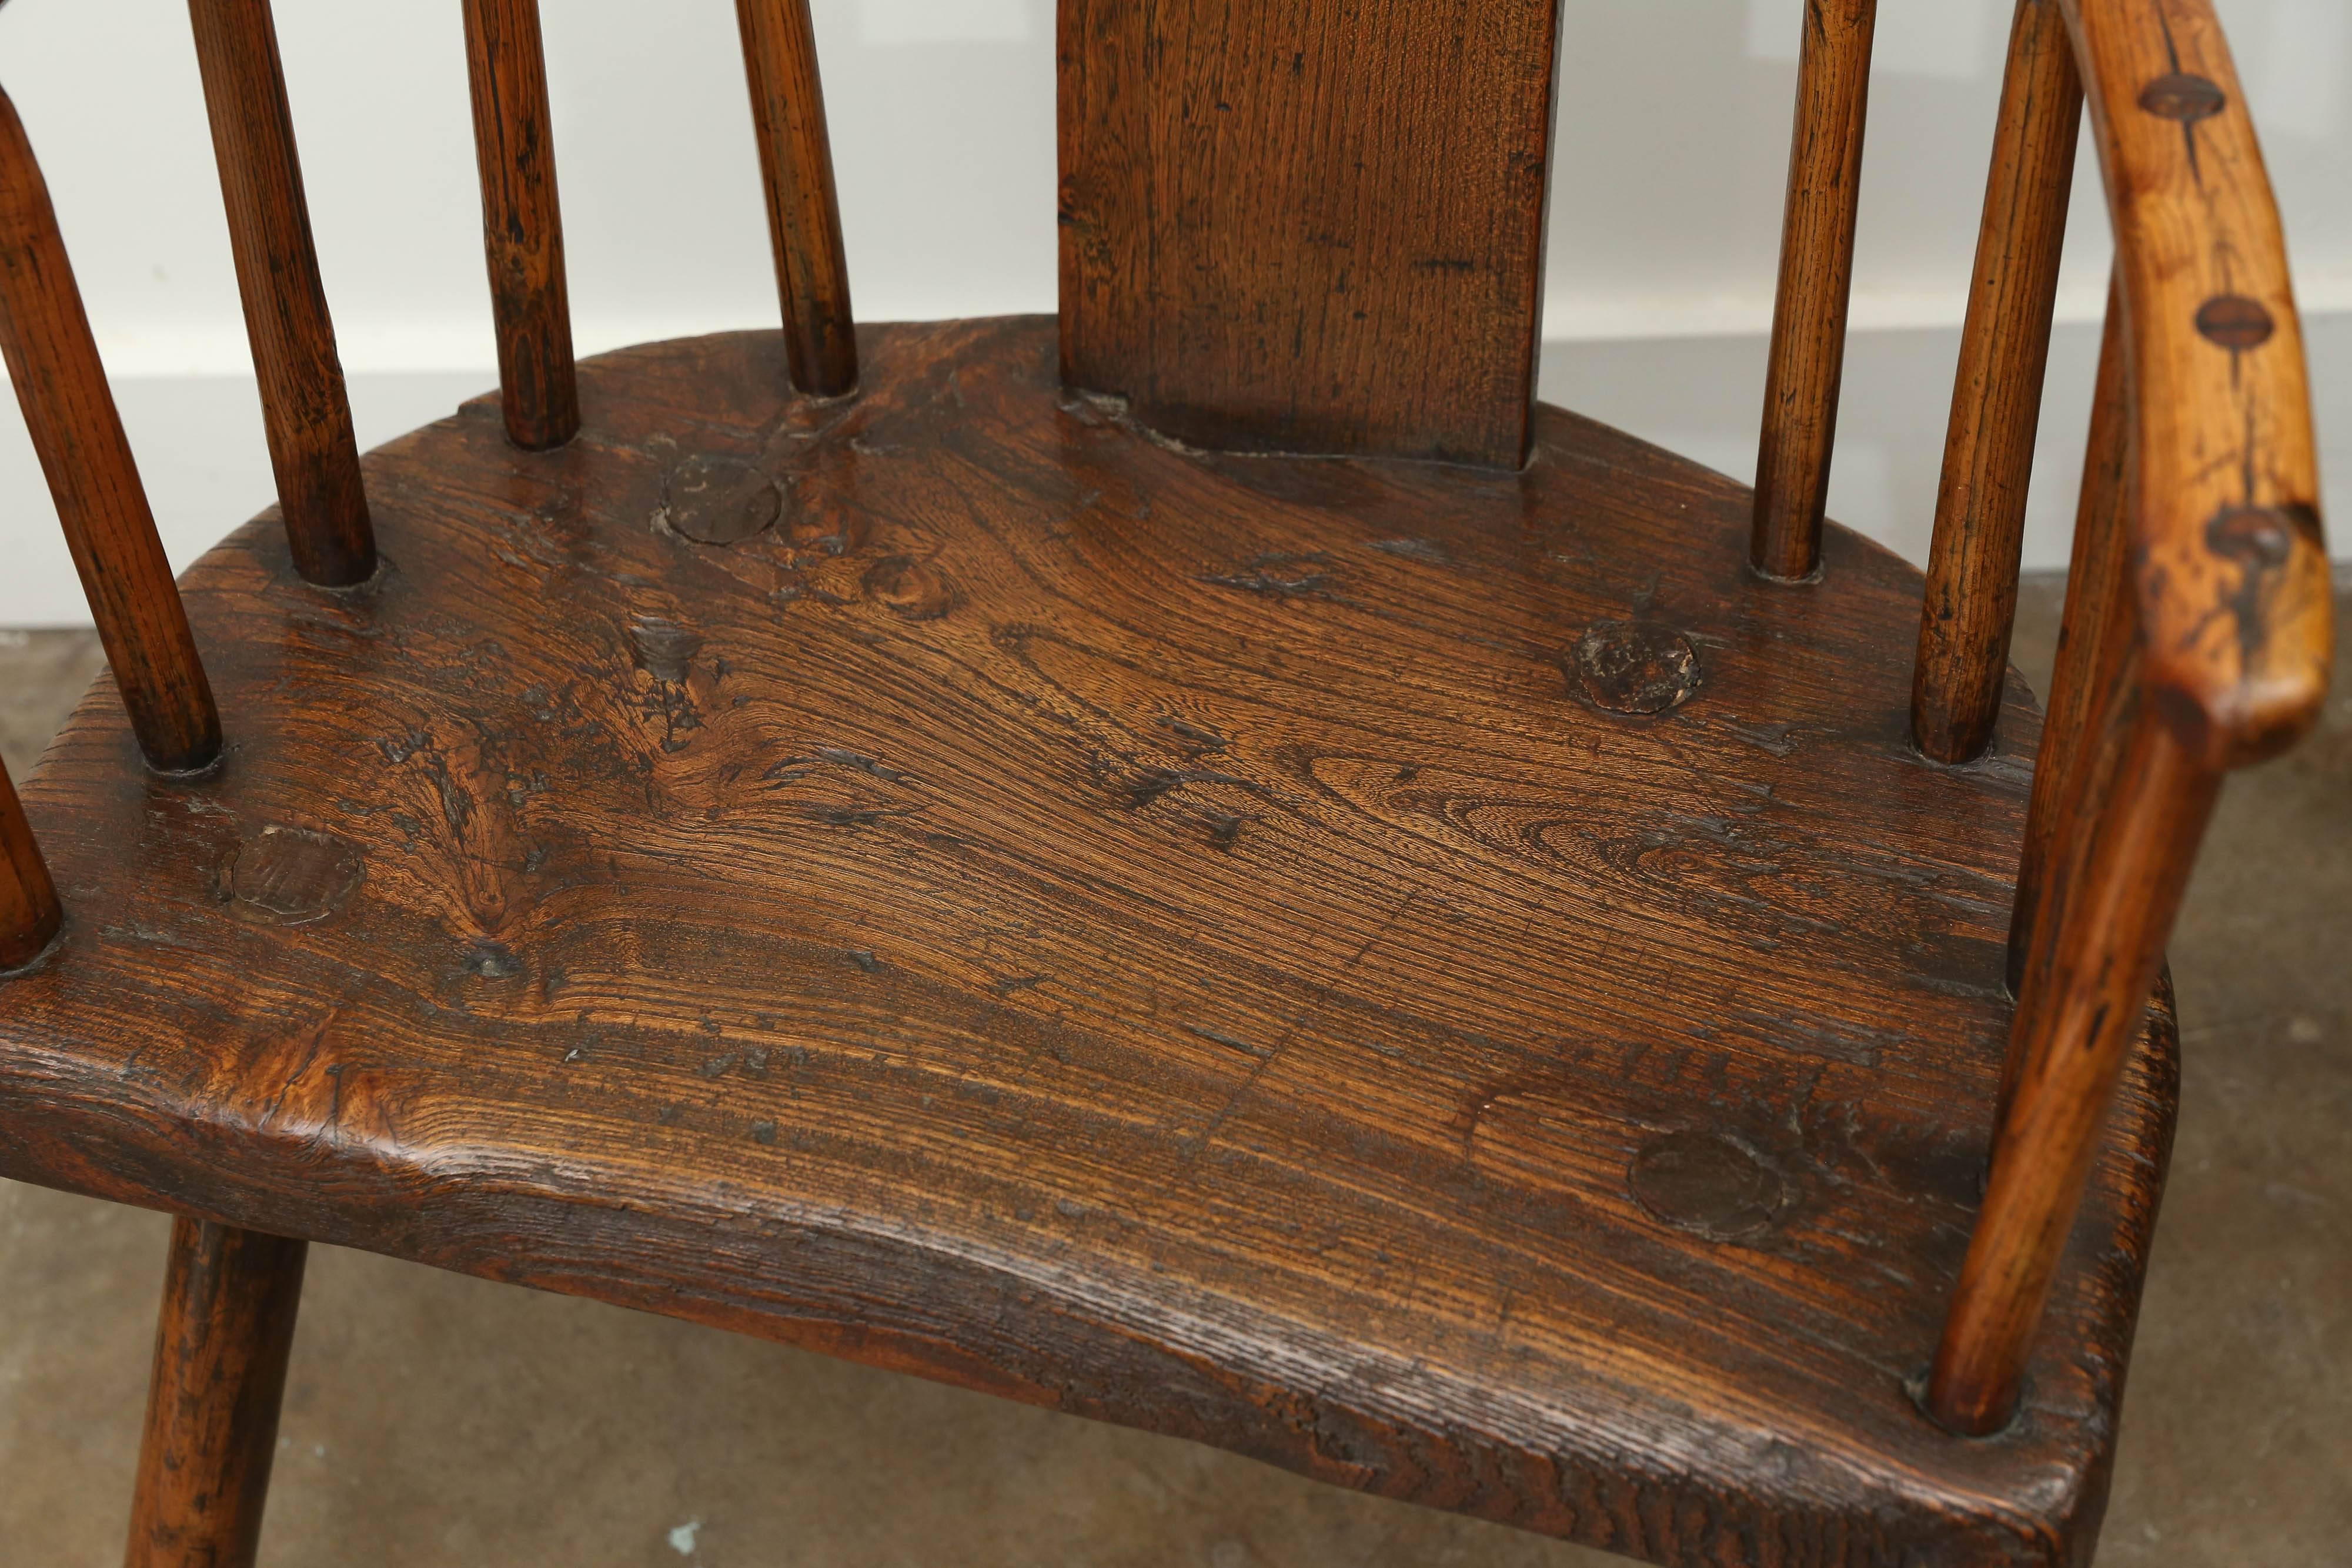 18th Century Welsh country folk art chair in elm. Beautiful patina, wonderful workmanship and remarkably comfortable. Very sturdy. This chair alone can provide wonderful atmosphere in a room.